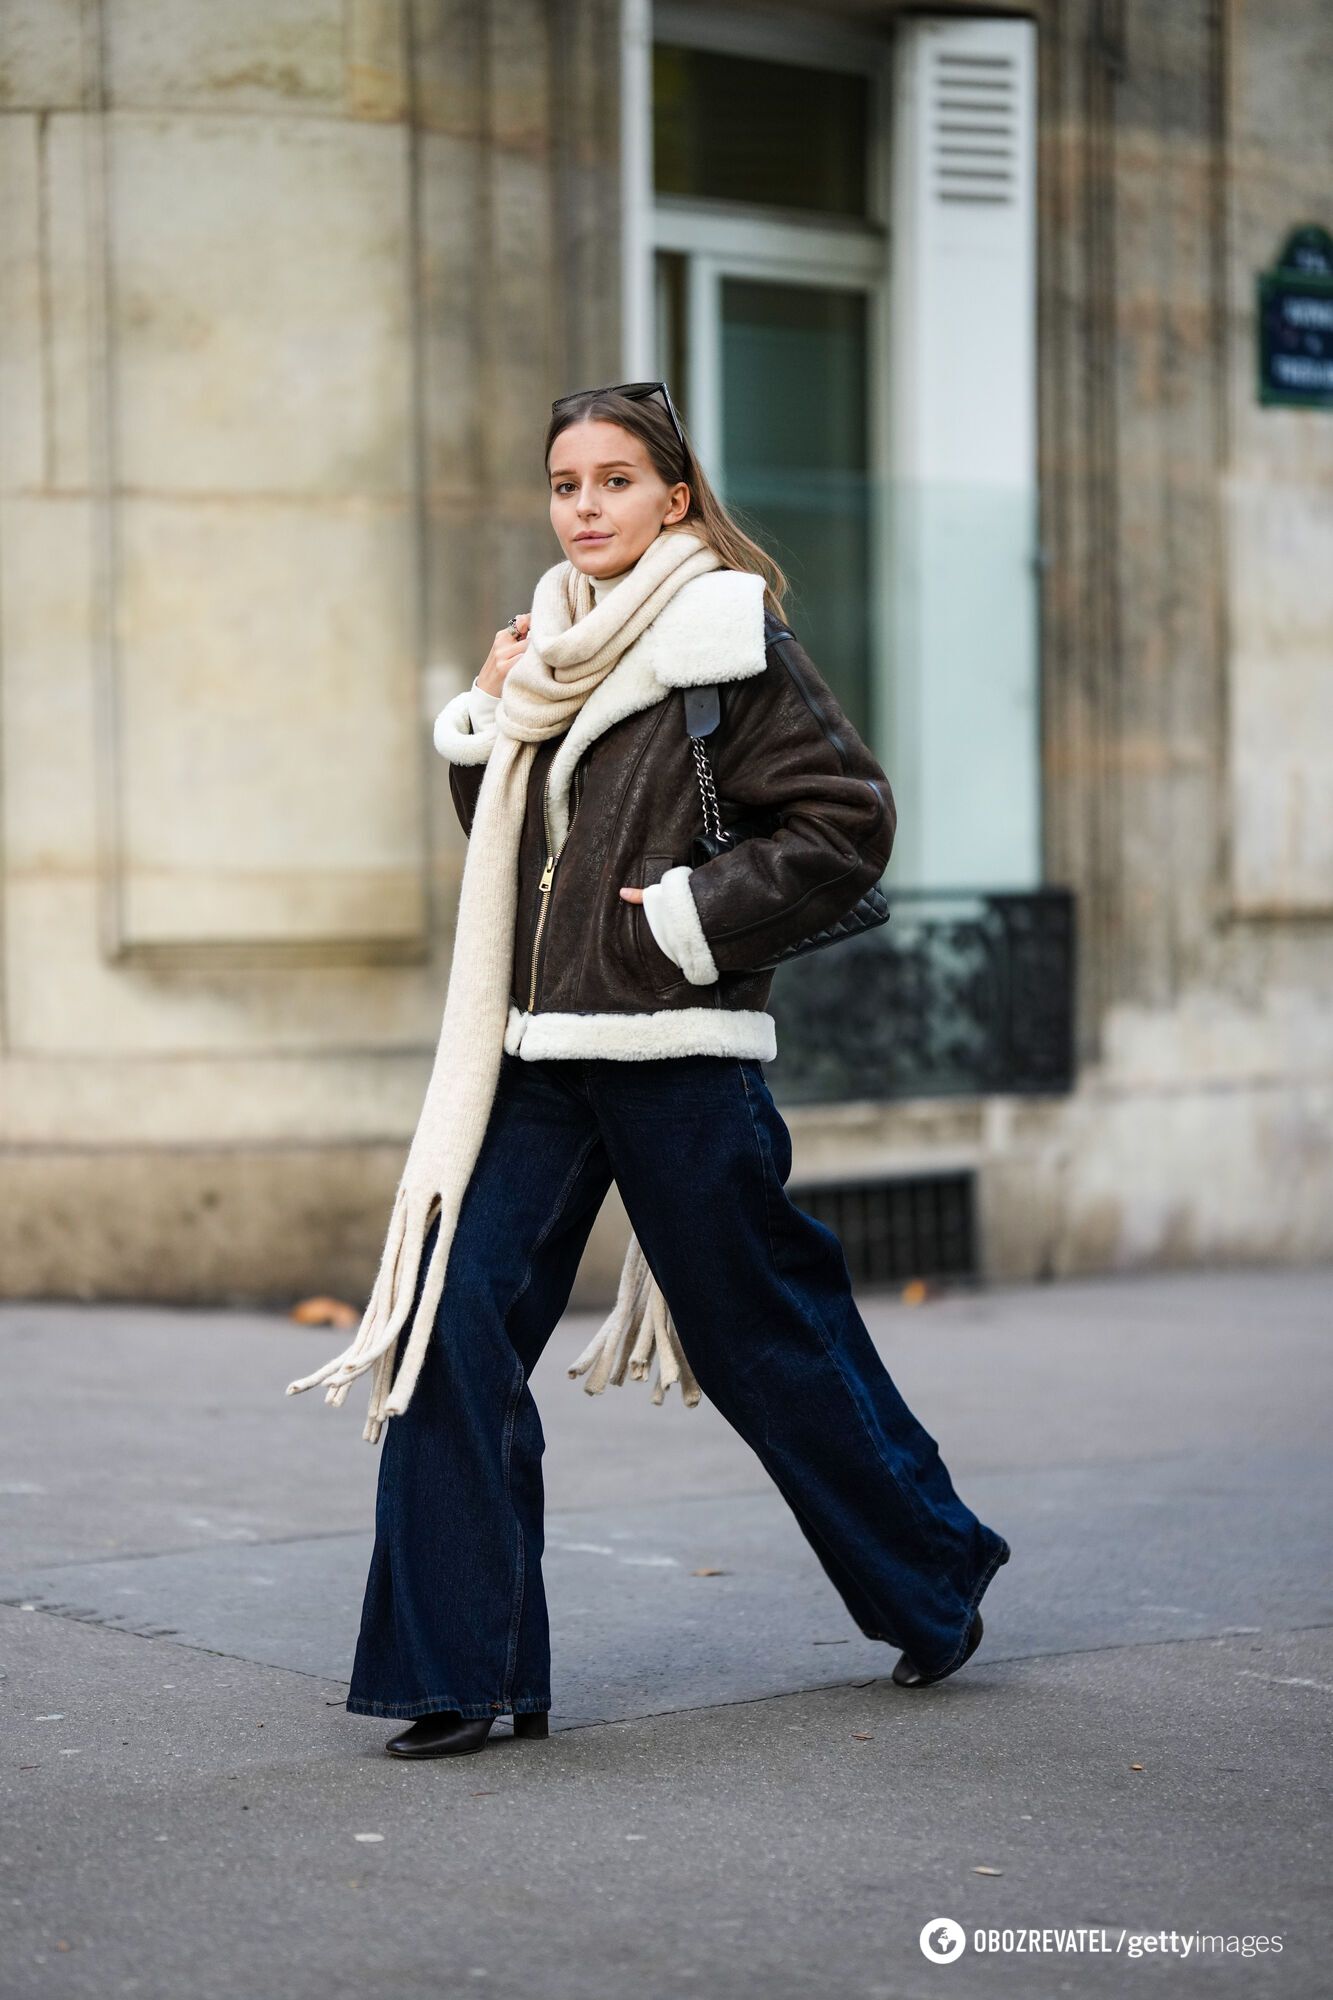 Style killers: 5 models of jeans that visually shorten legs